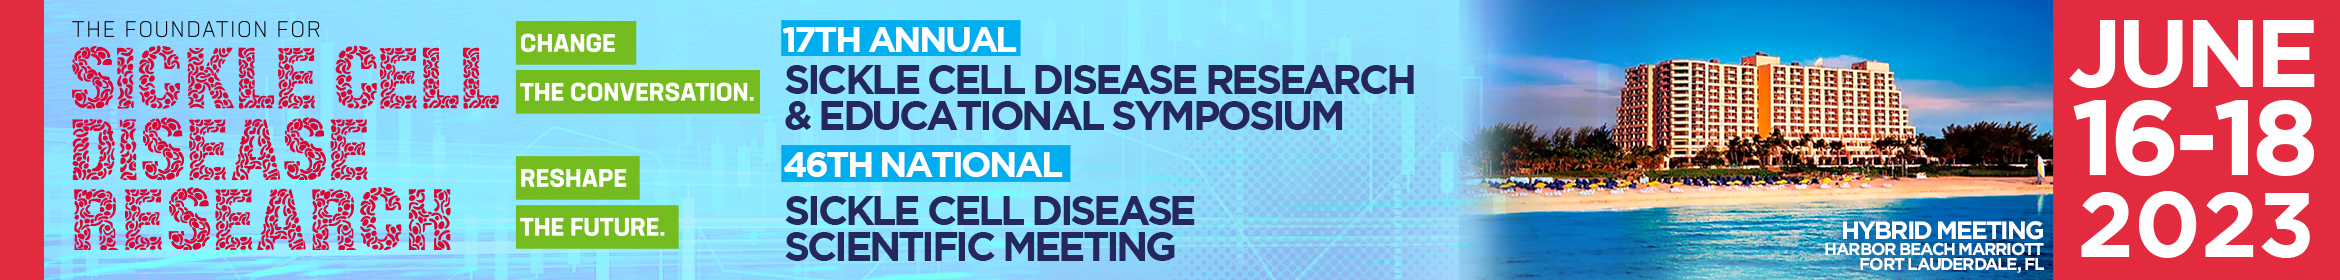 FSCDR's 17th Annual SCD Research and Educational Symposium & 46th Nat'l SCD Scientific Meeting Main banner